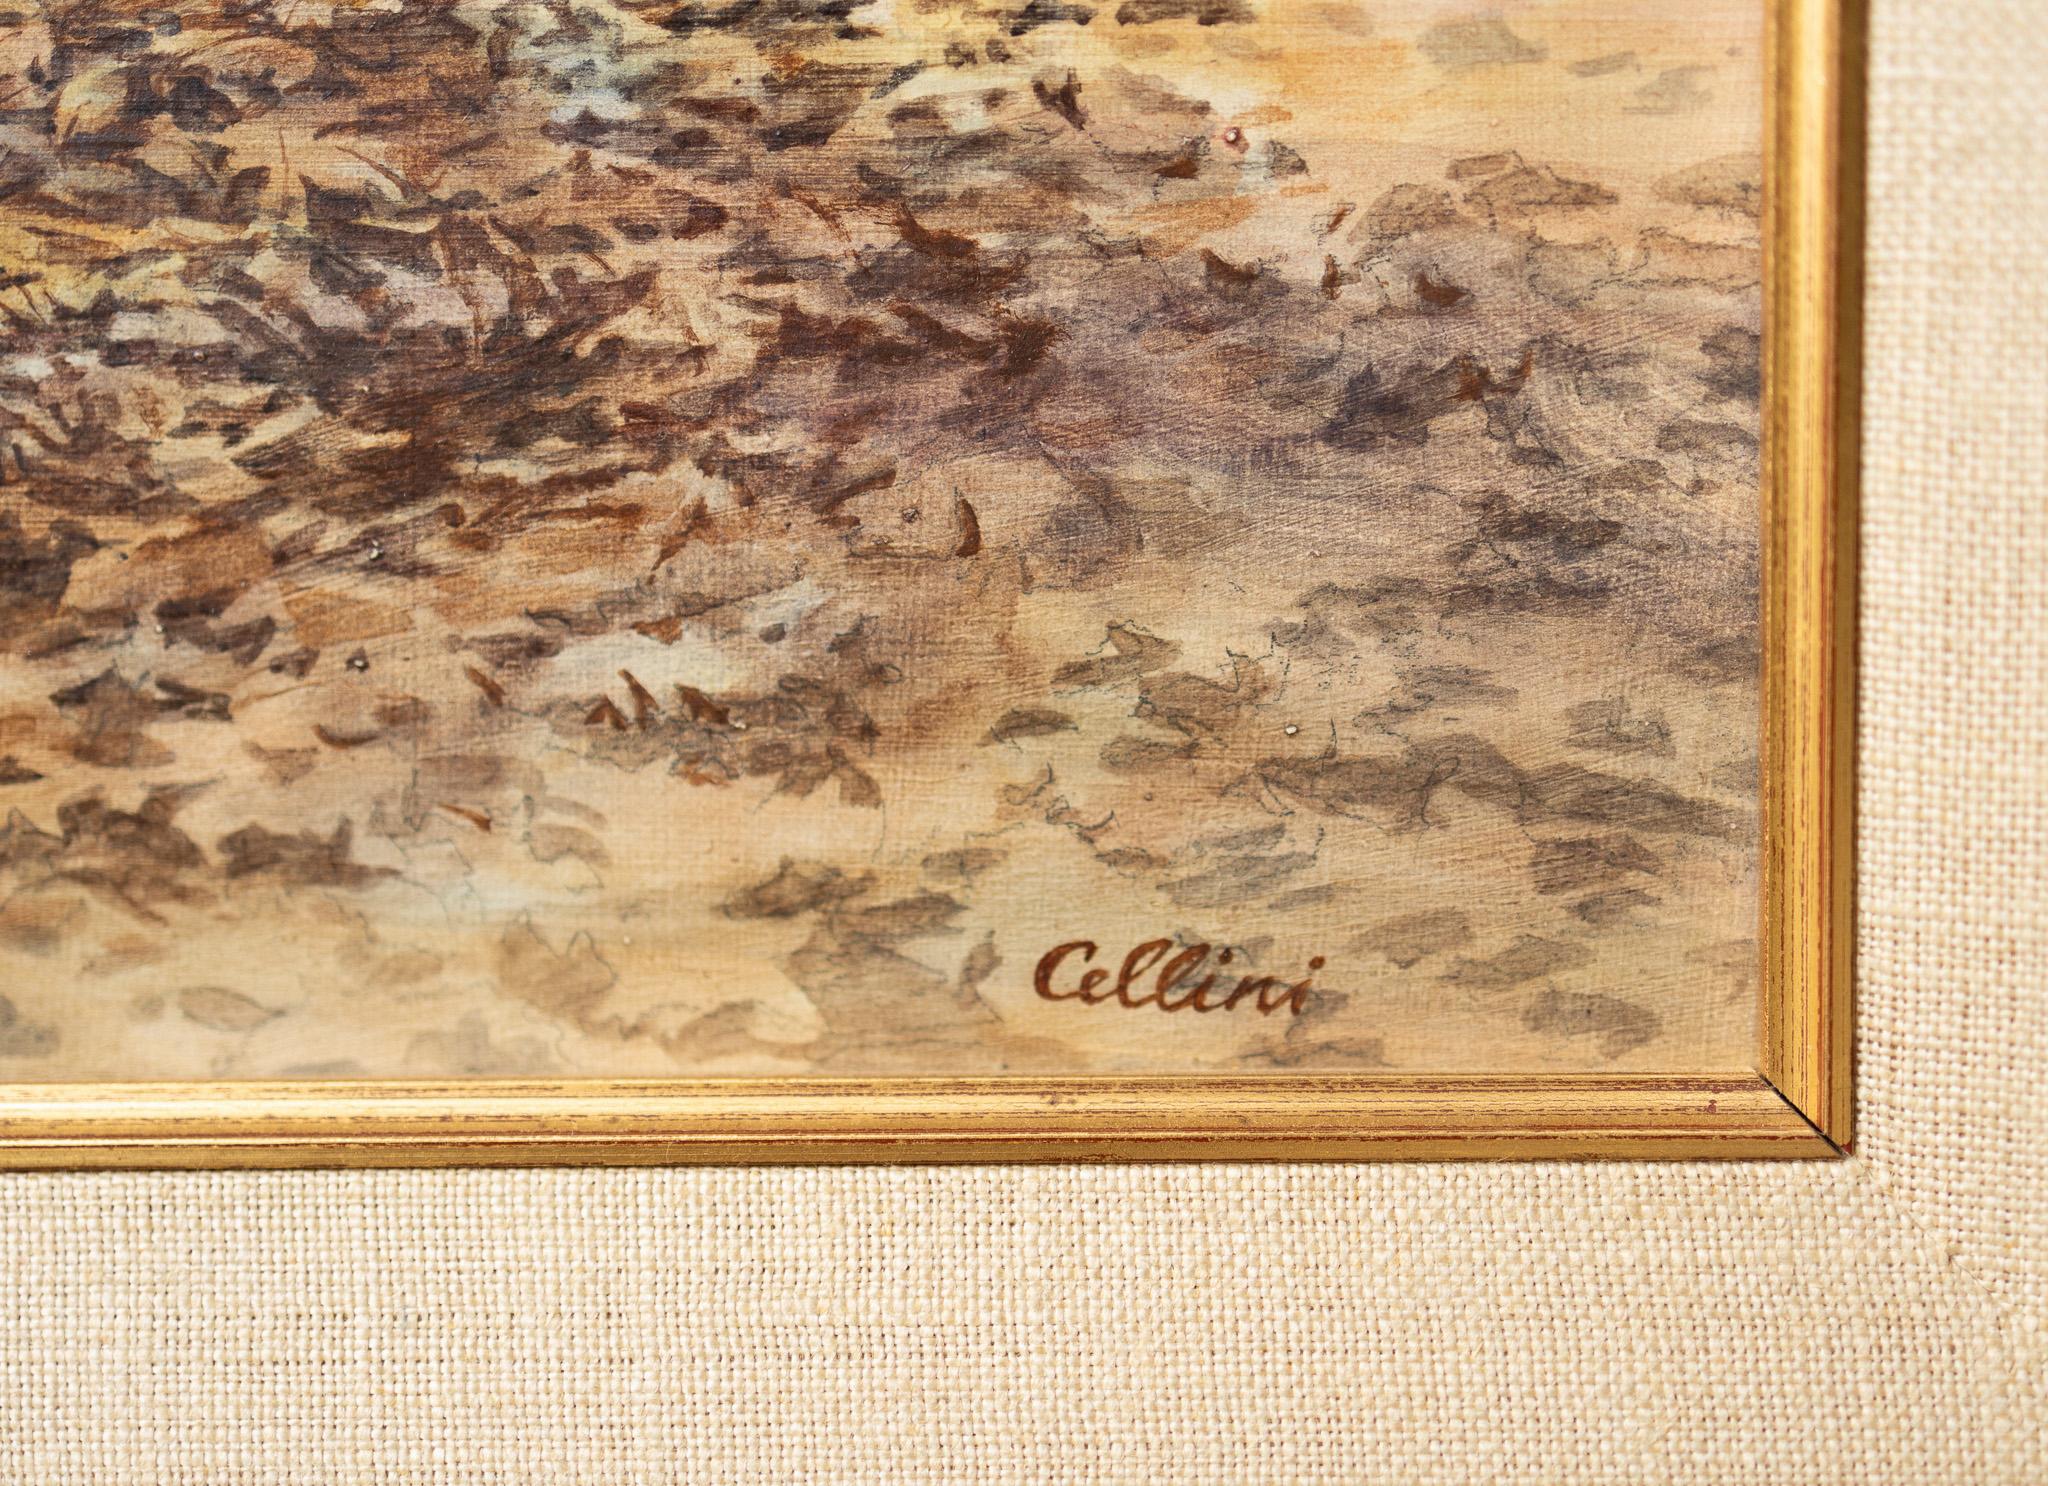 Painting of a male elk looking at the viewer as a heard runs away. The landscape is dry and brown. 
By Eva Cellini
18